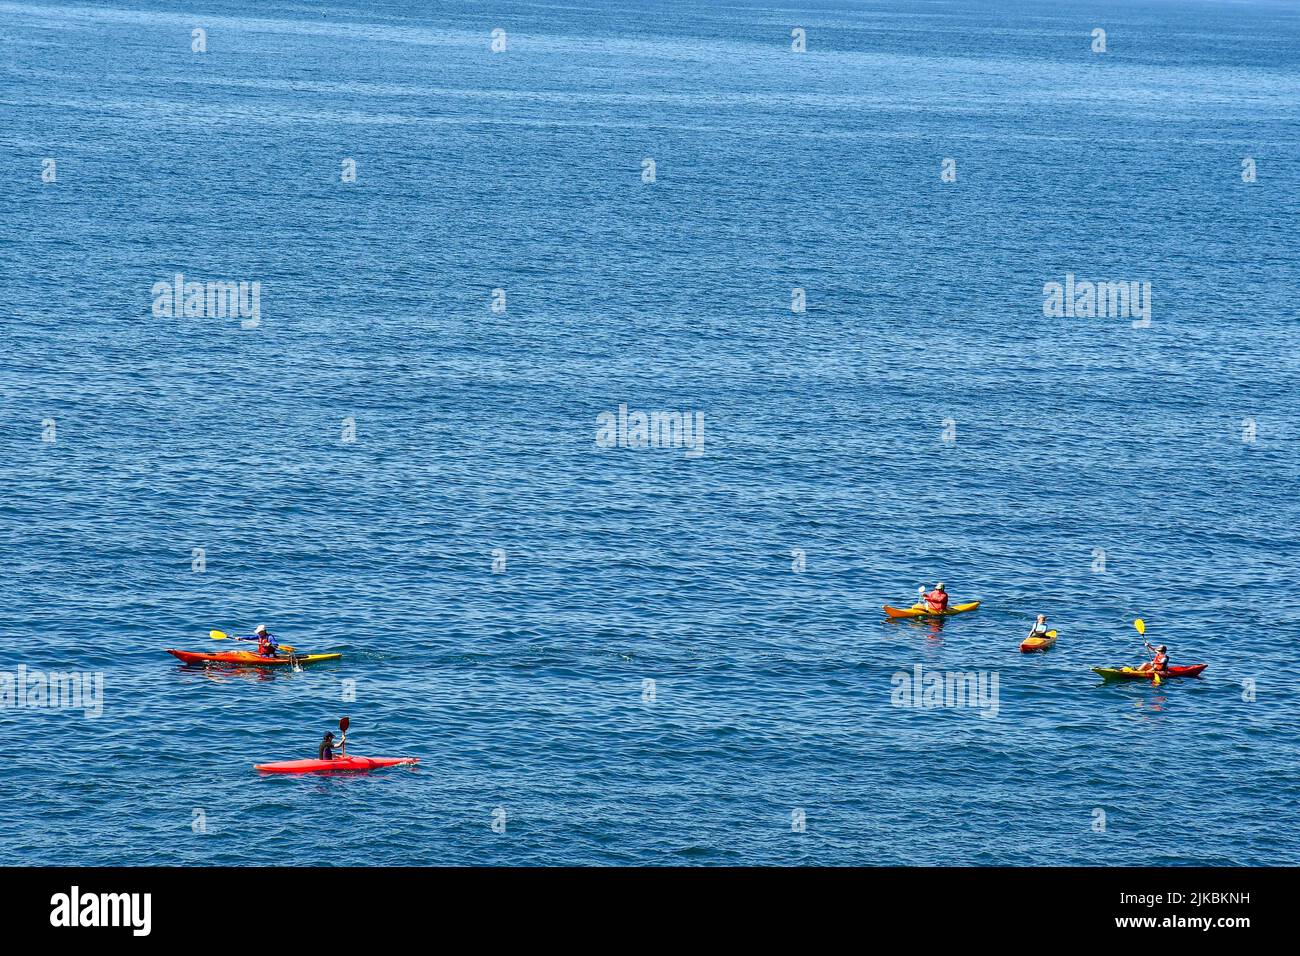 High-angle view of a group of five people kayaking on the sea, Nervi, Genoa, Liguria, Italy Stock Photo